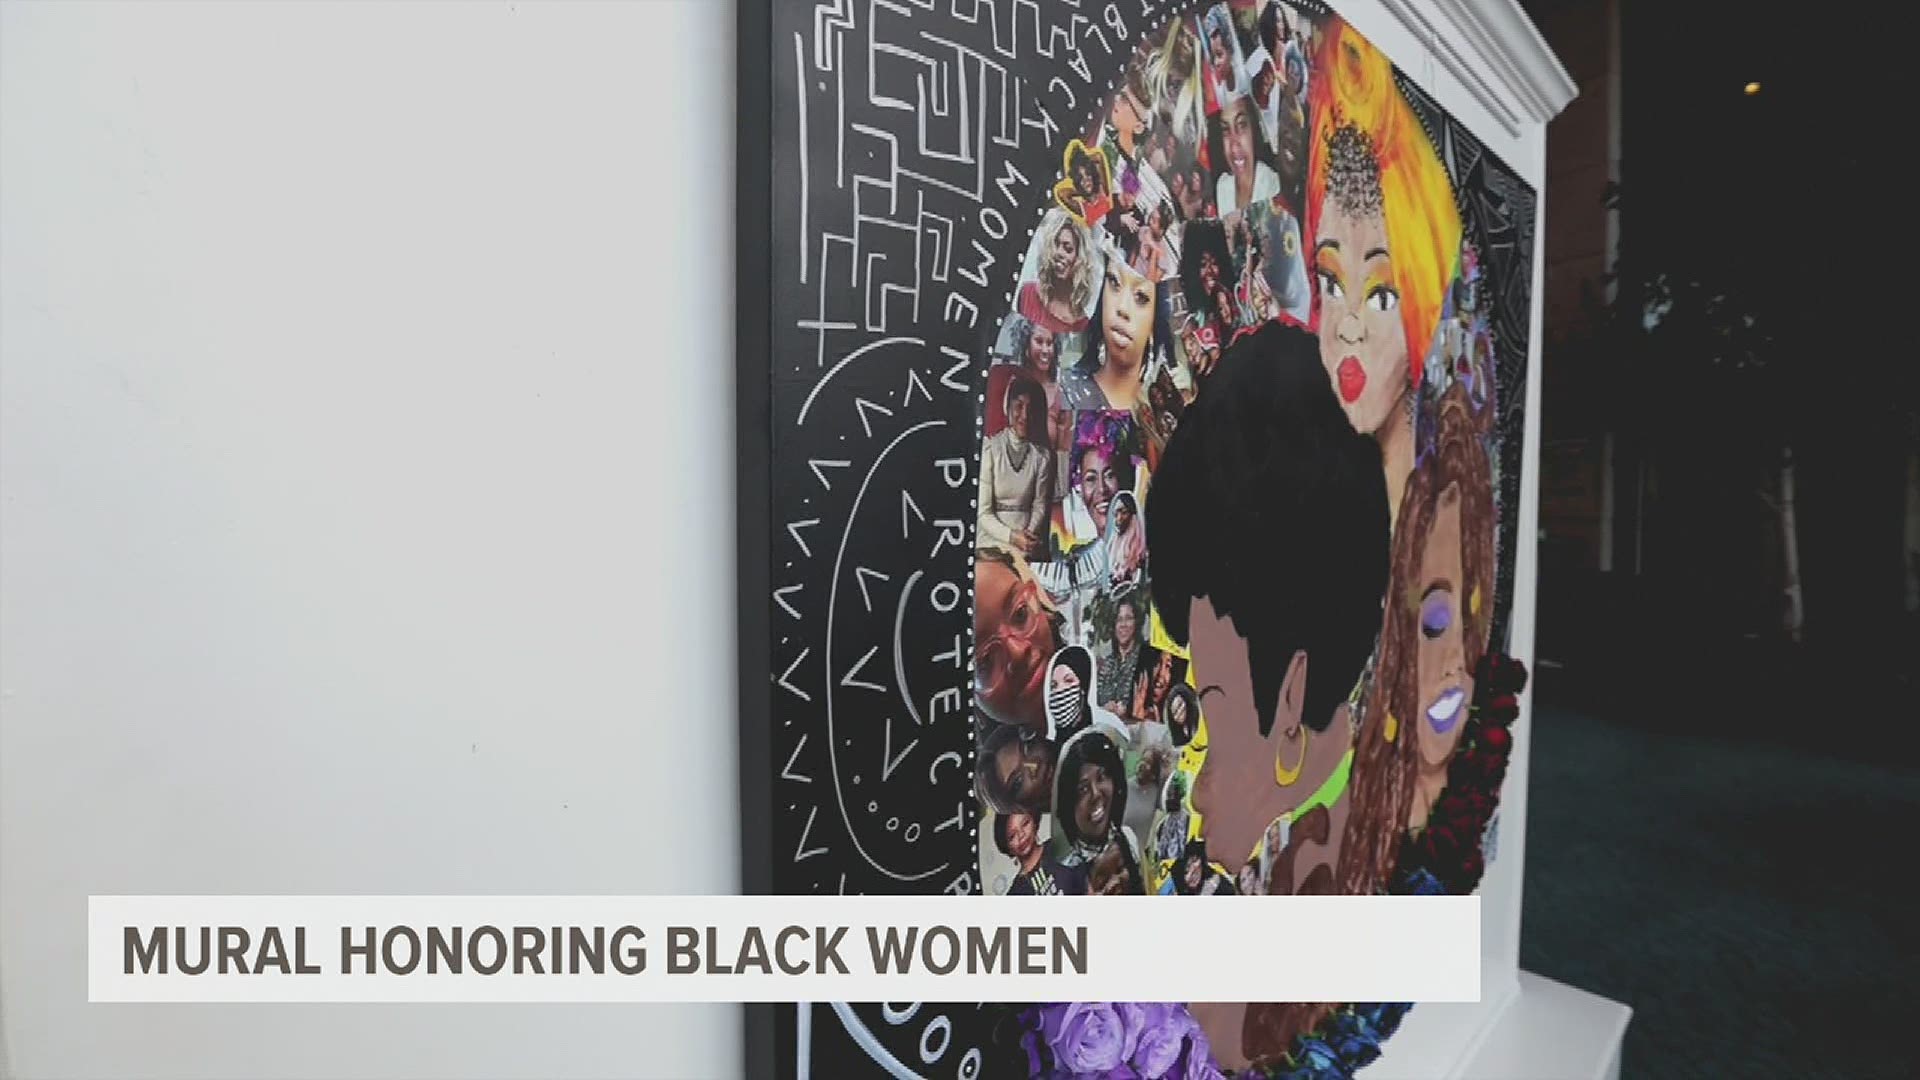 The mural titled "Protection" highlights the lack of and need for the protection of Black women.